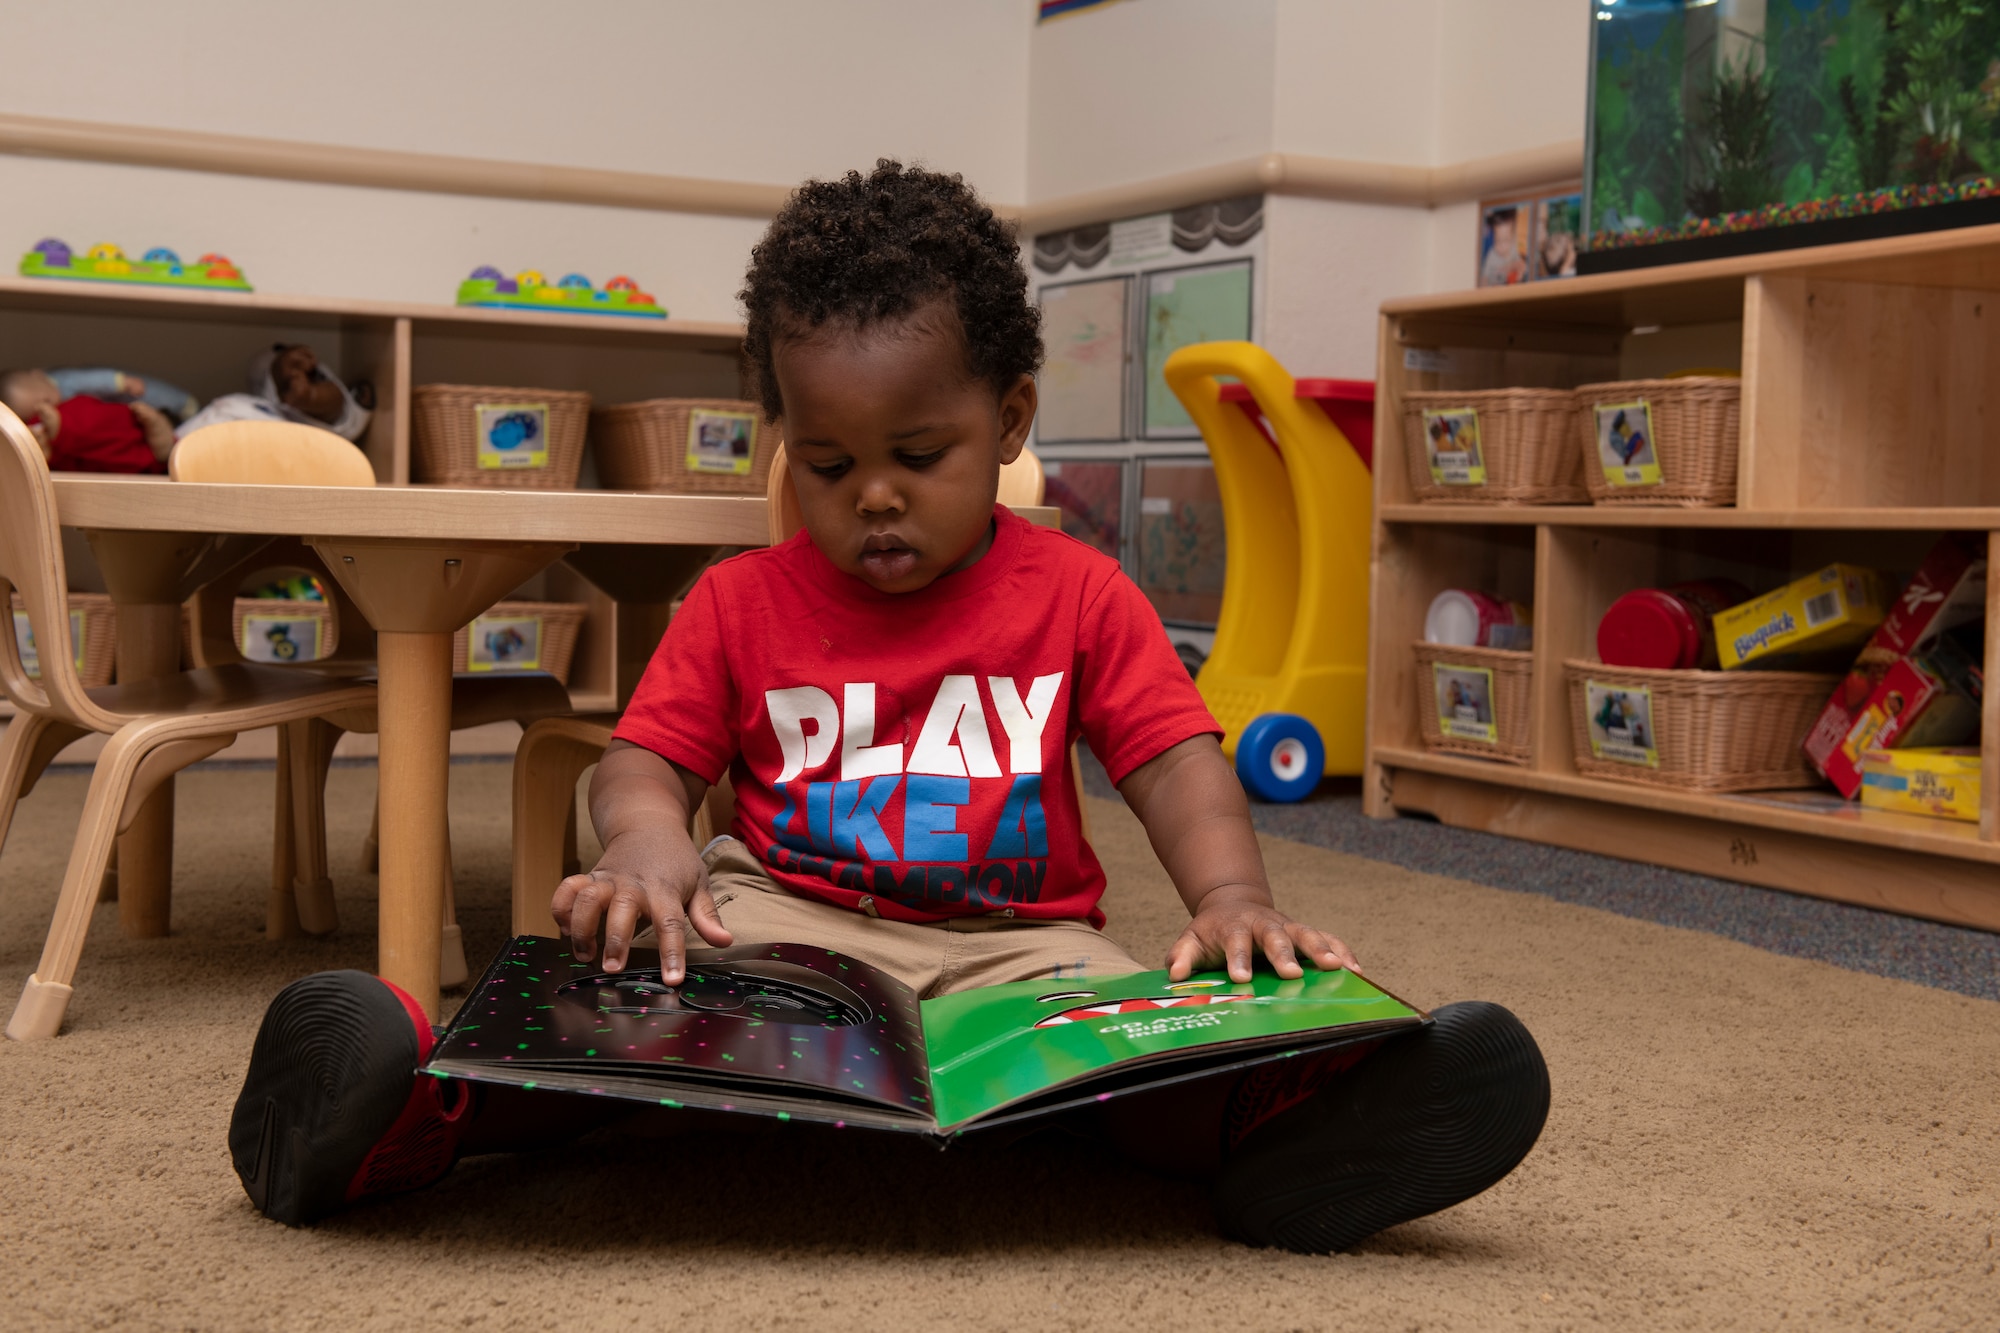 A child reads a book May 1, 2020, inside Child Development Center 3 at Travis Air Force Base, California. The center is one of three childcare centers at Travis AFB that provide care for children from six weeks to 5-years-old. (U.S. Air Force photo by Tech. Sgt. James Hodgman)